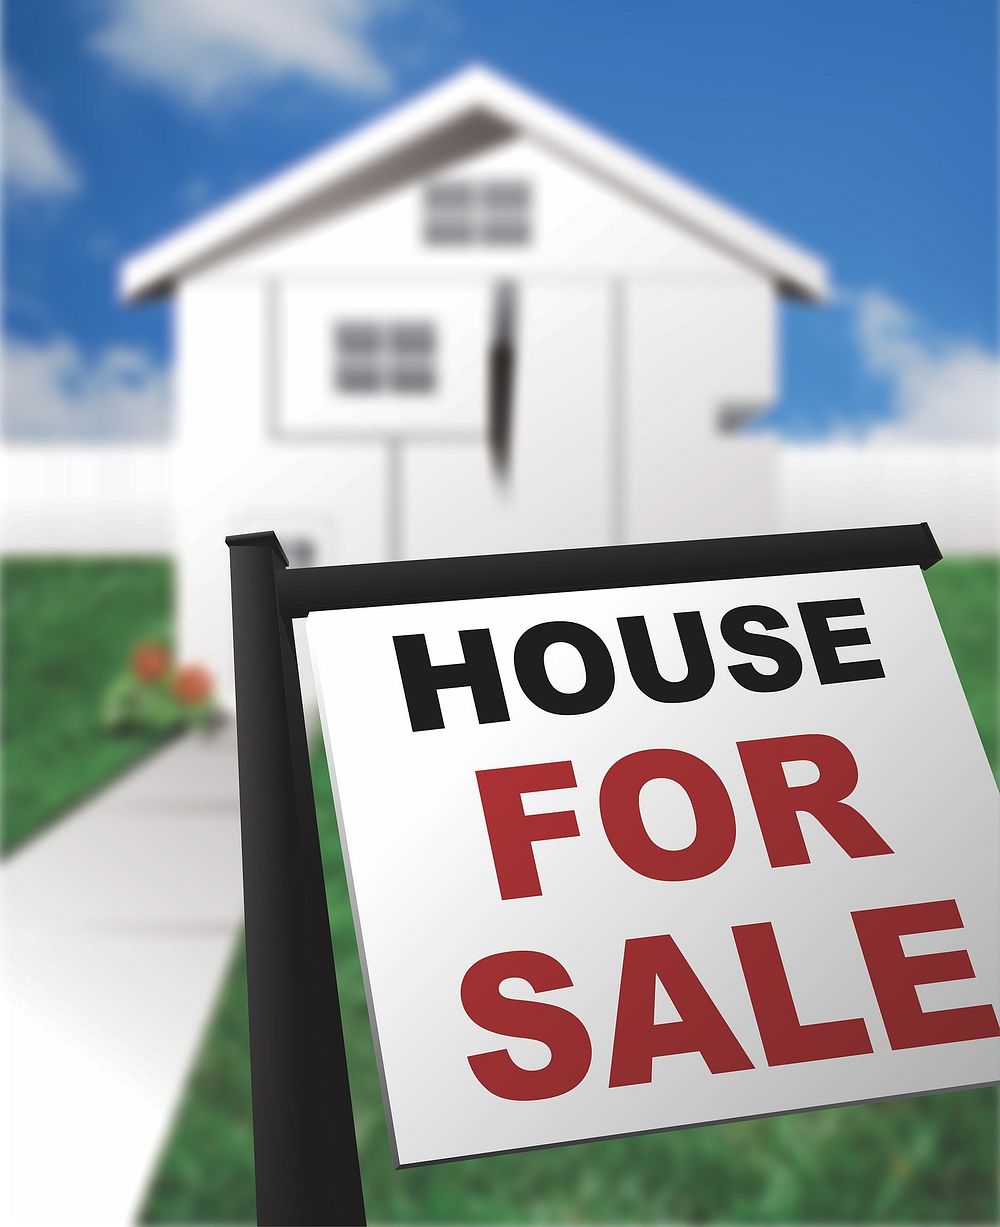 Free house for sale real estate sign image, public domain CC0 photo.